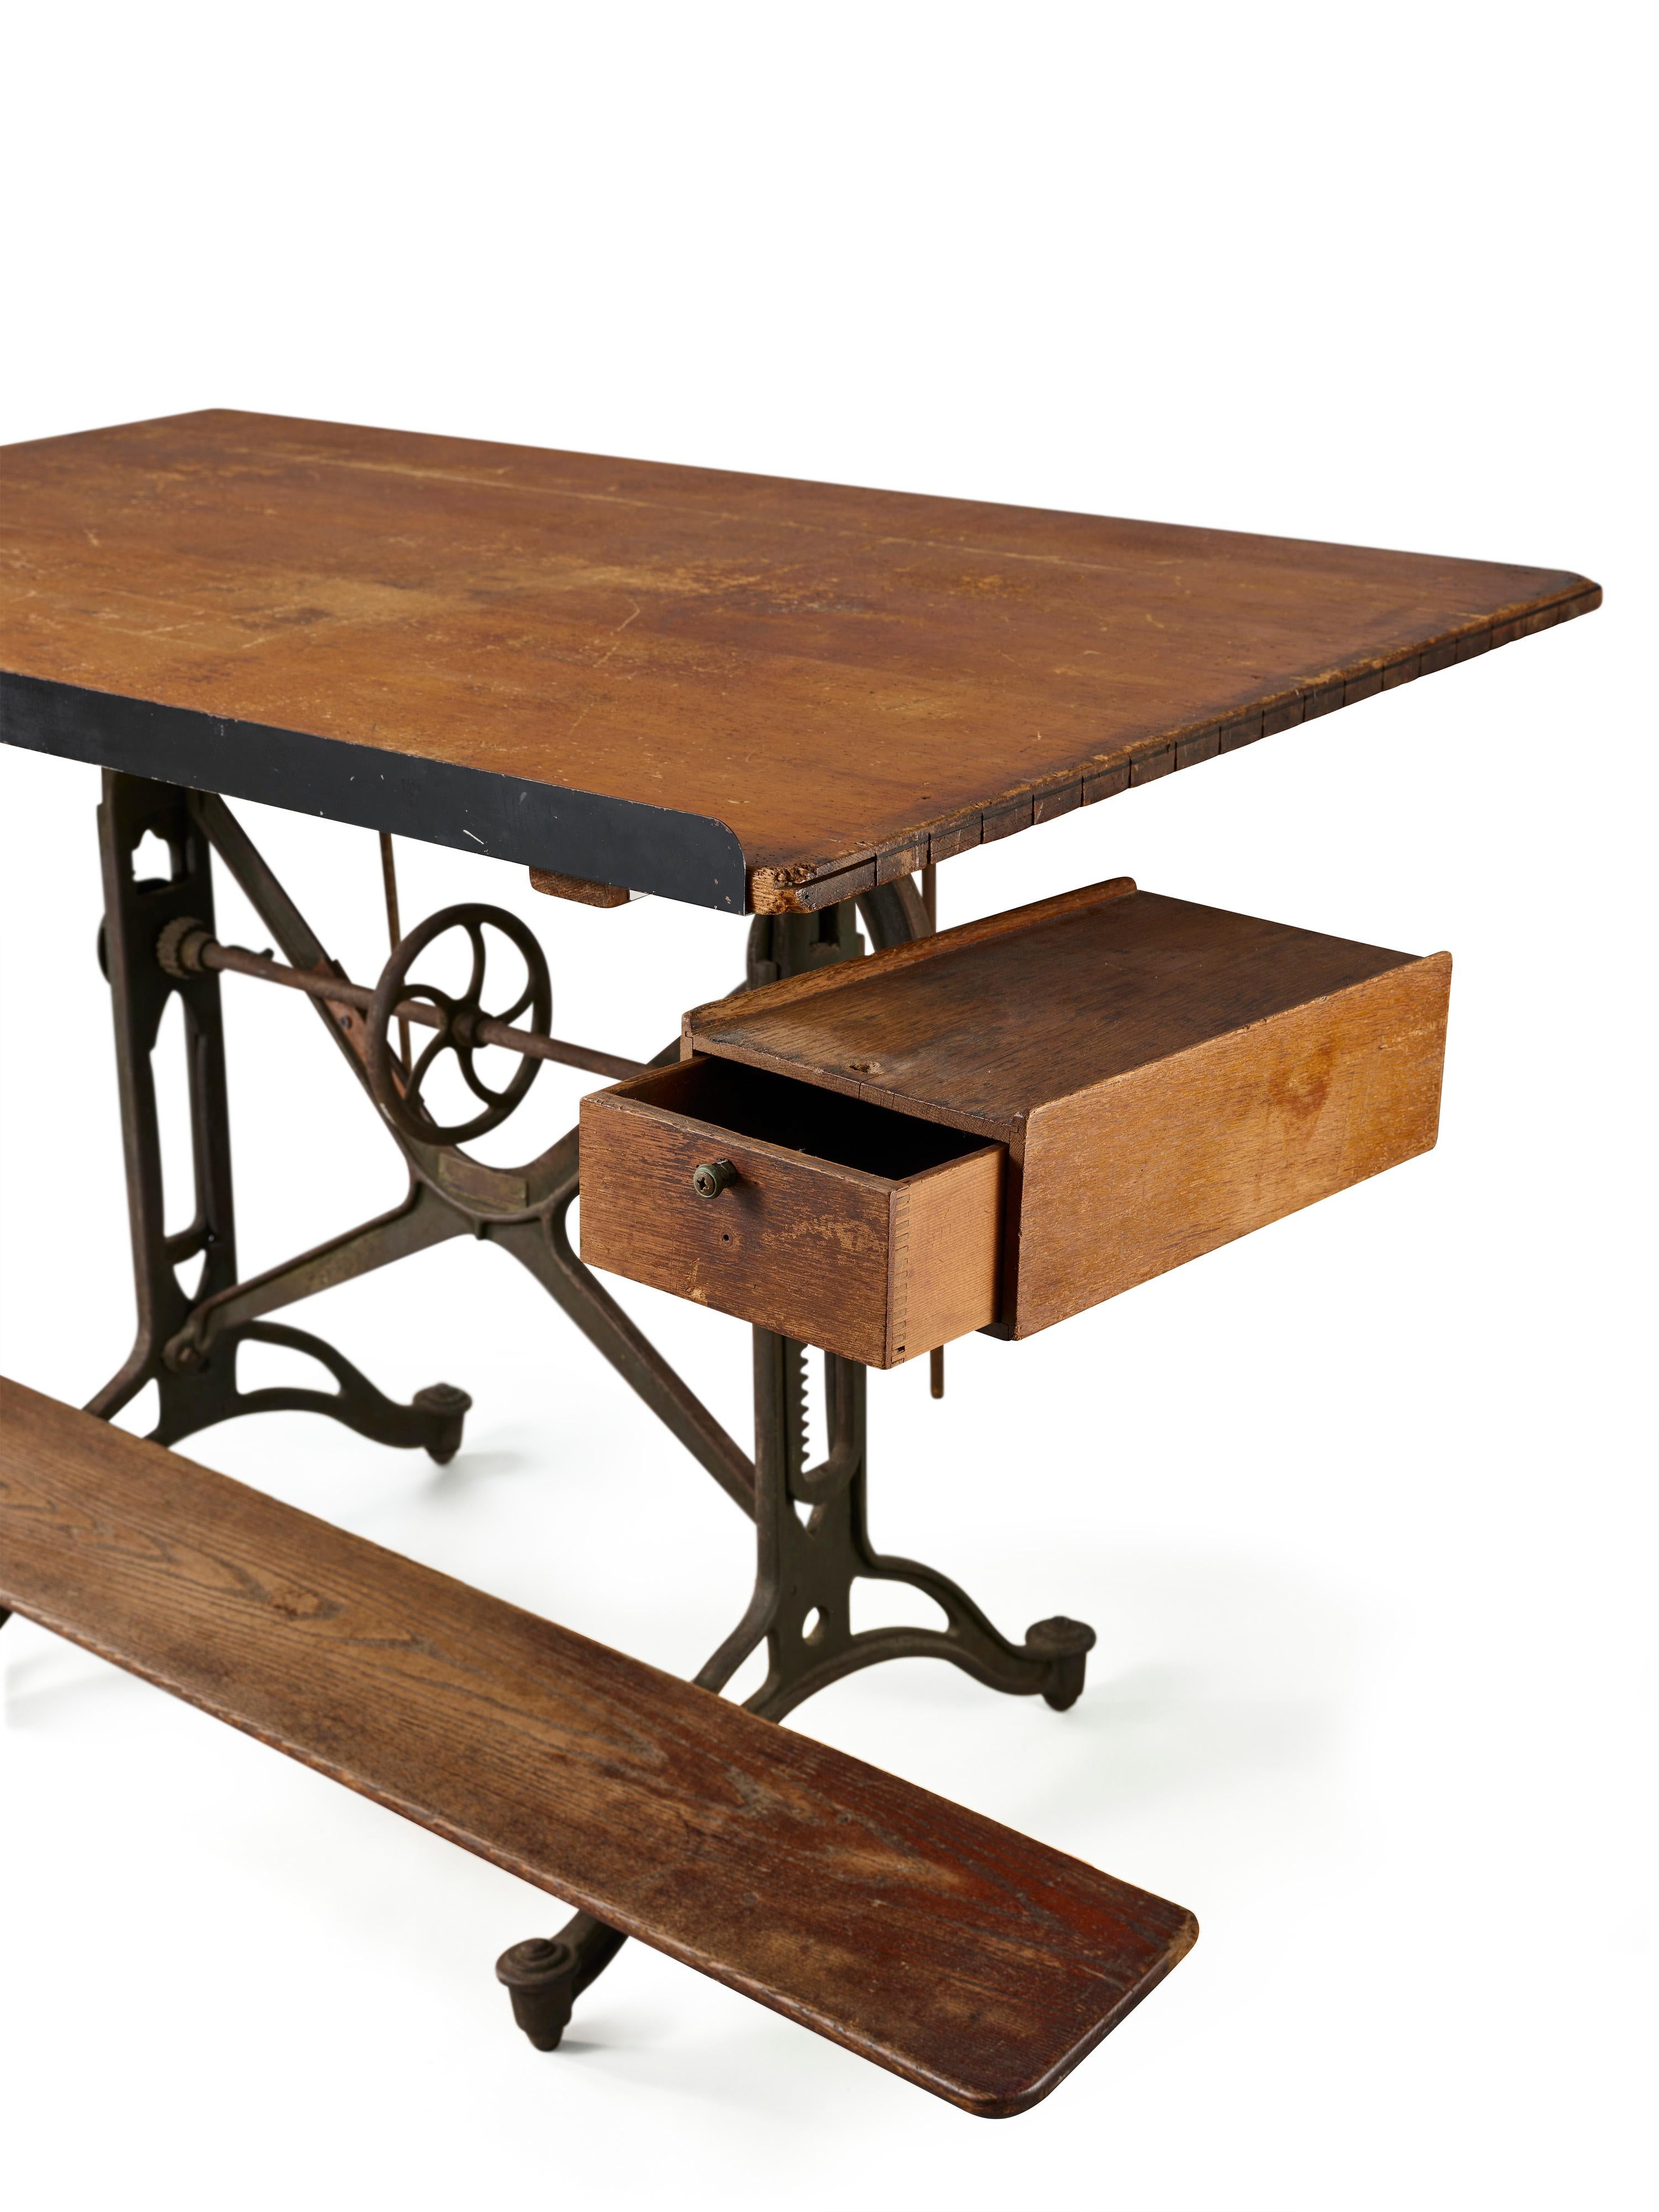 Original Keuffel and Esser Drafting Table In Good Condition For Sale In Hong Kong, HK